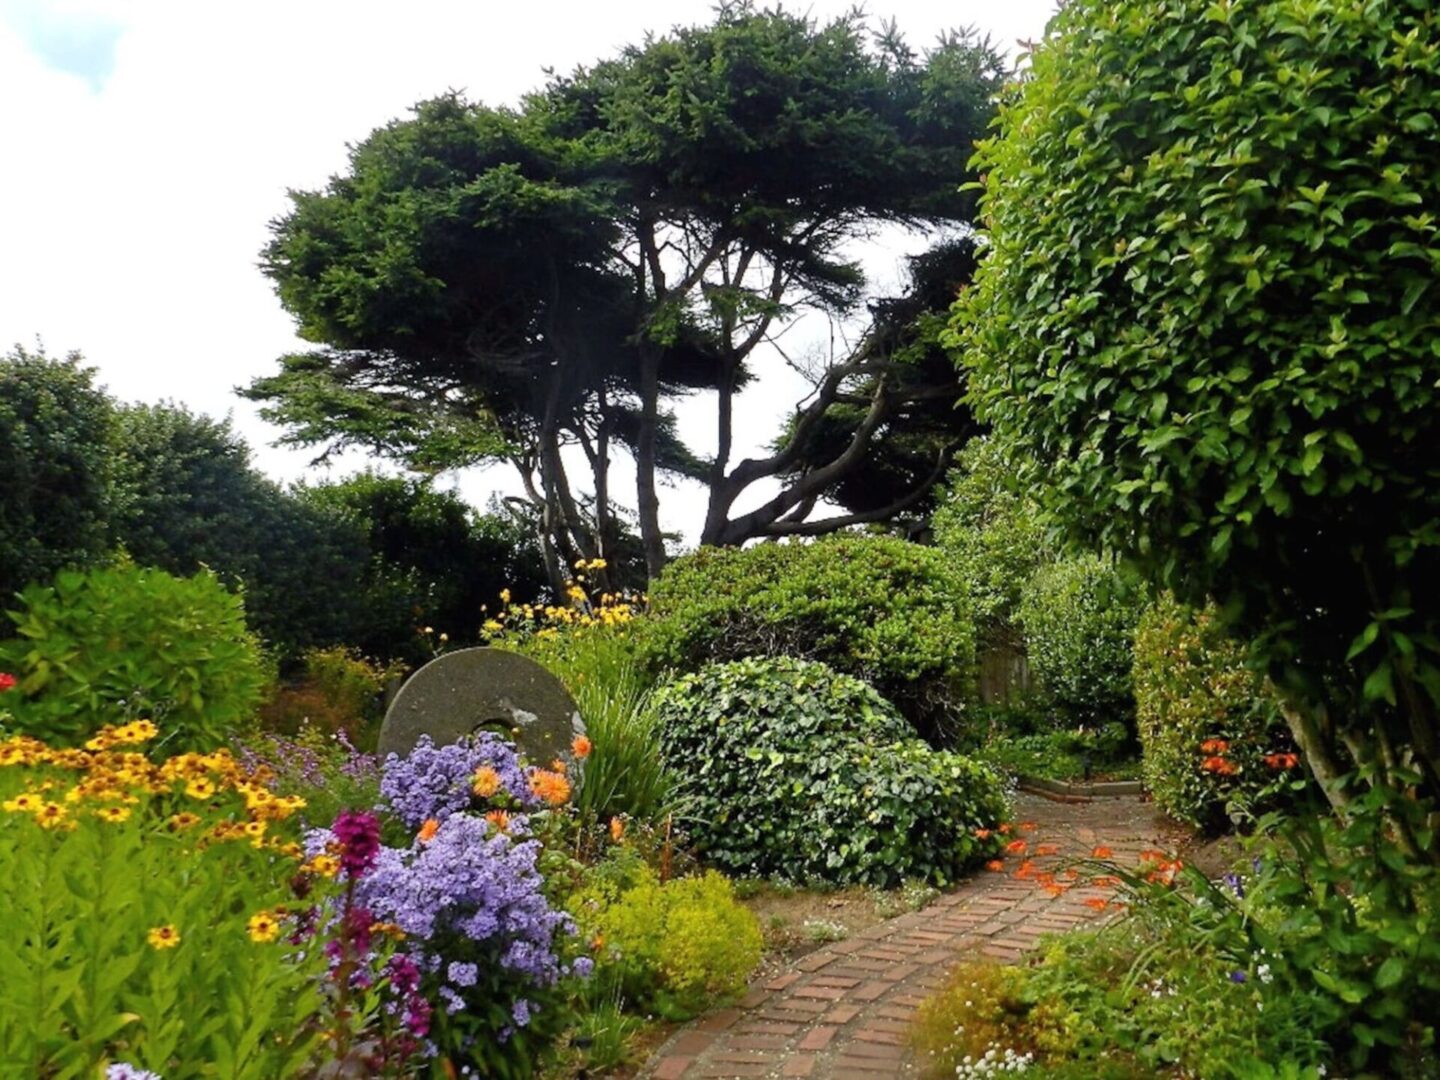 A garden with many different plants and flowers.